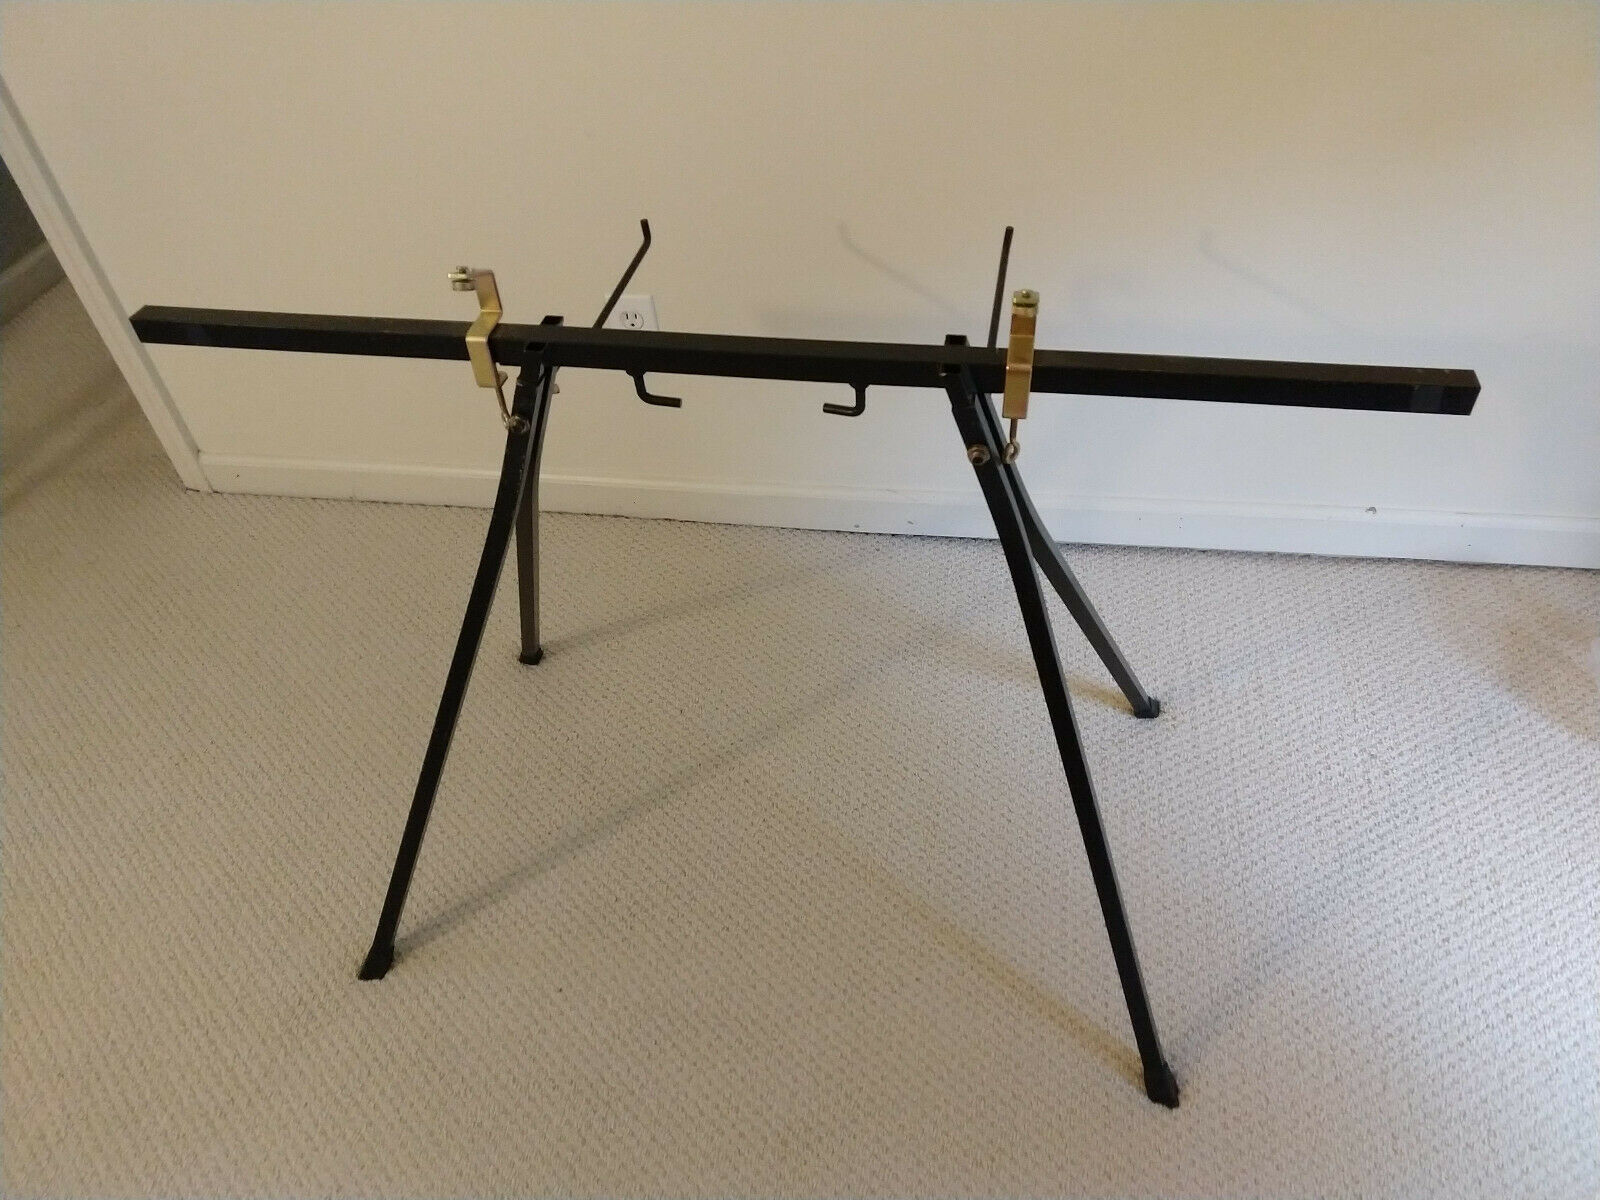 Knitting Machine Tilt Stand With Two Clamps - Good Used Condition